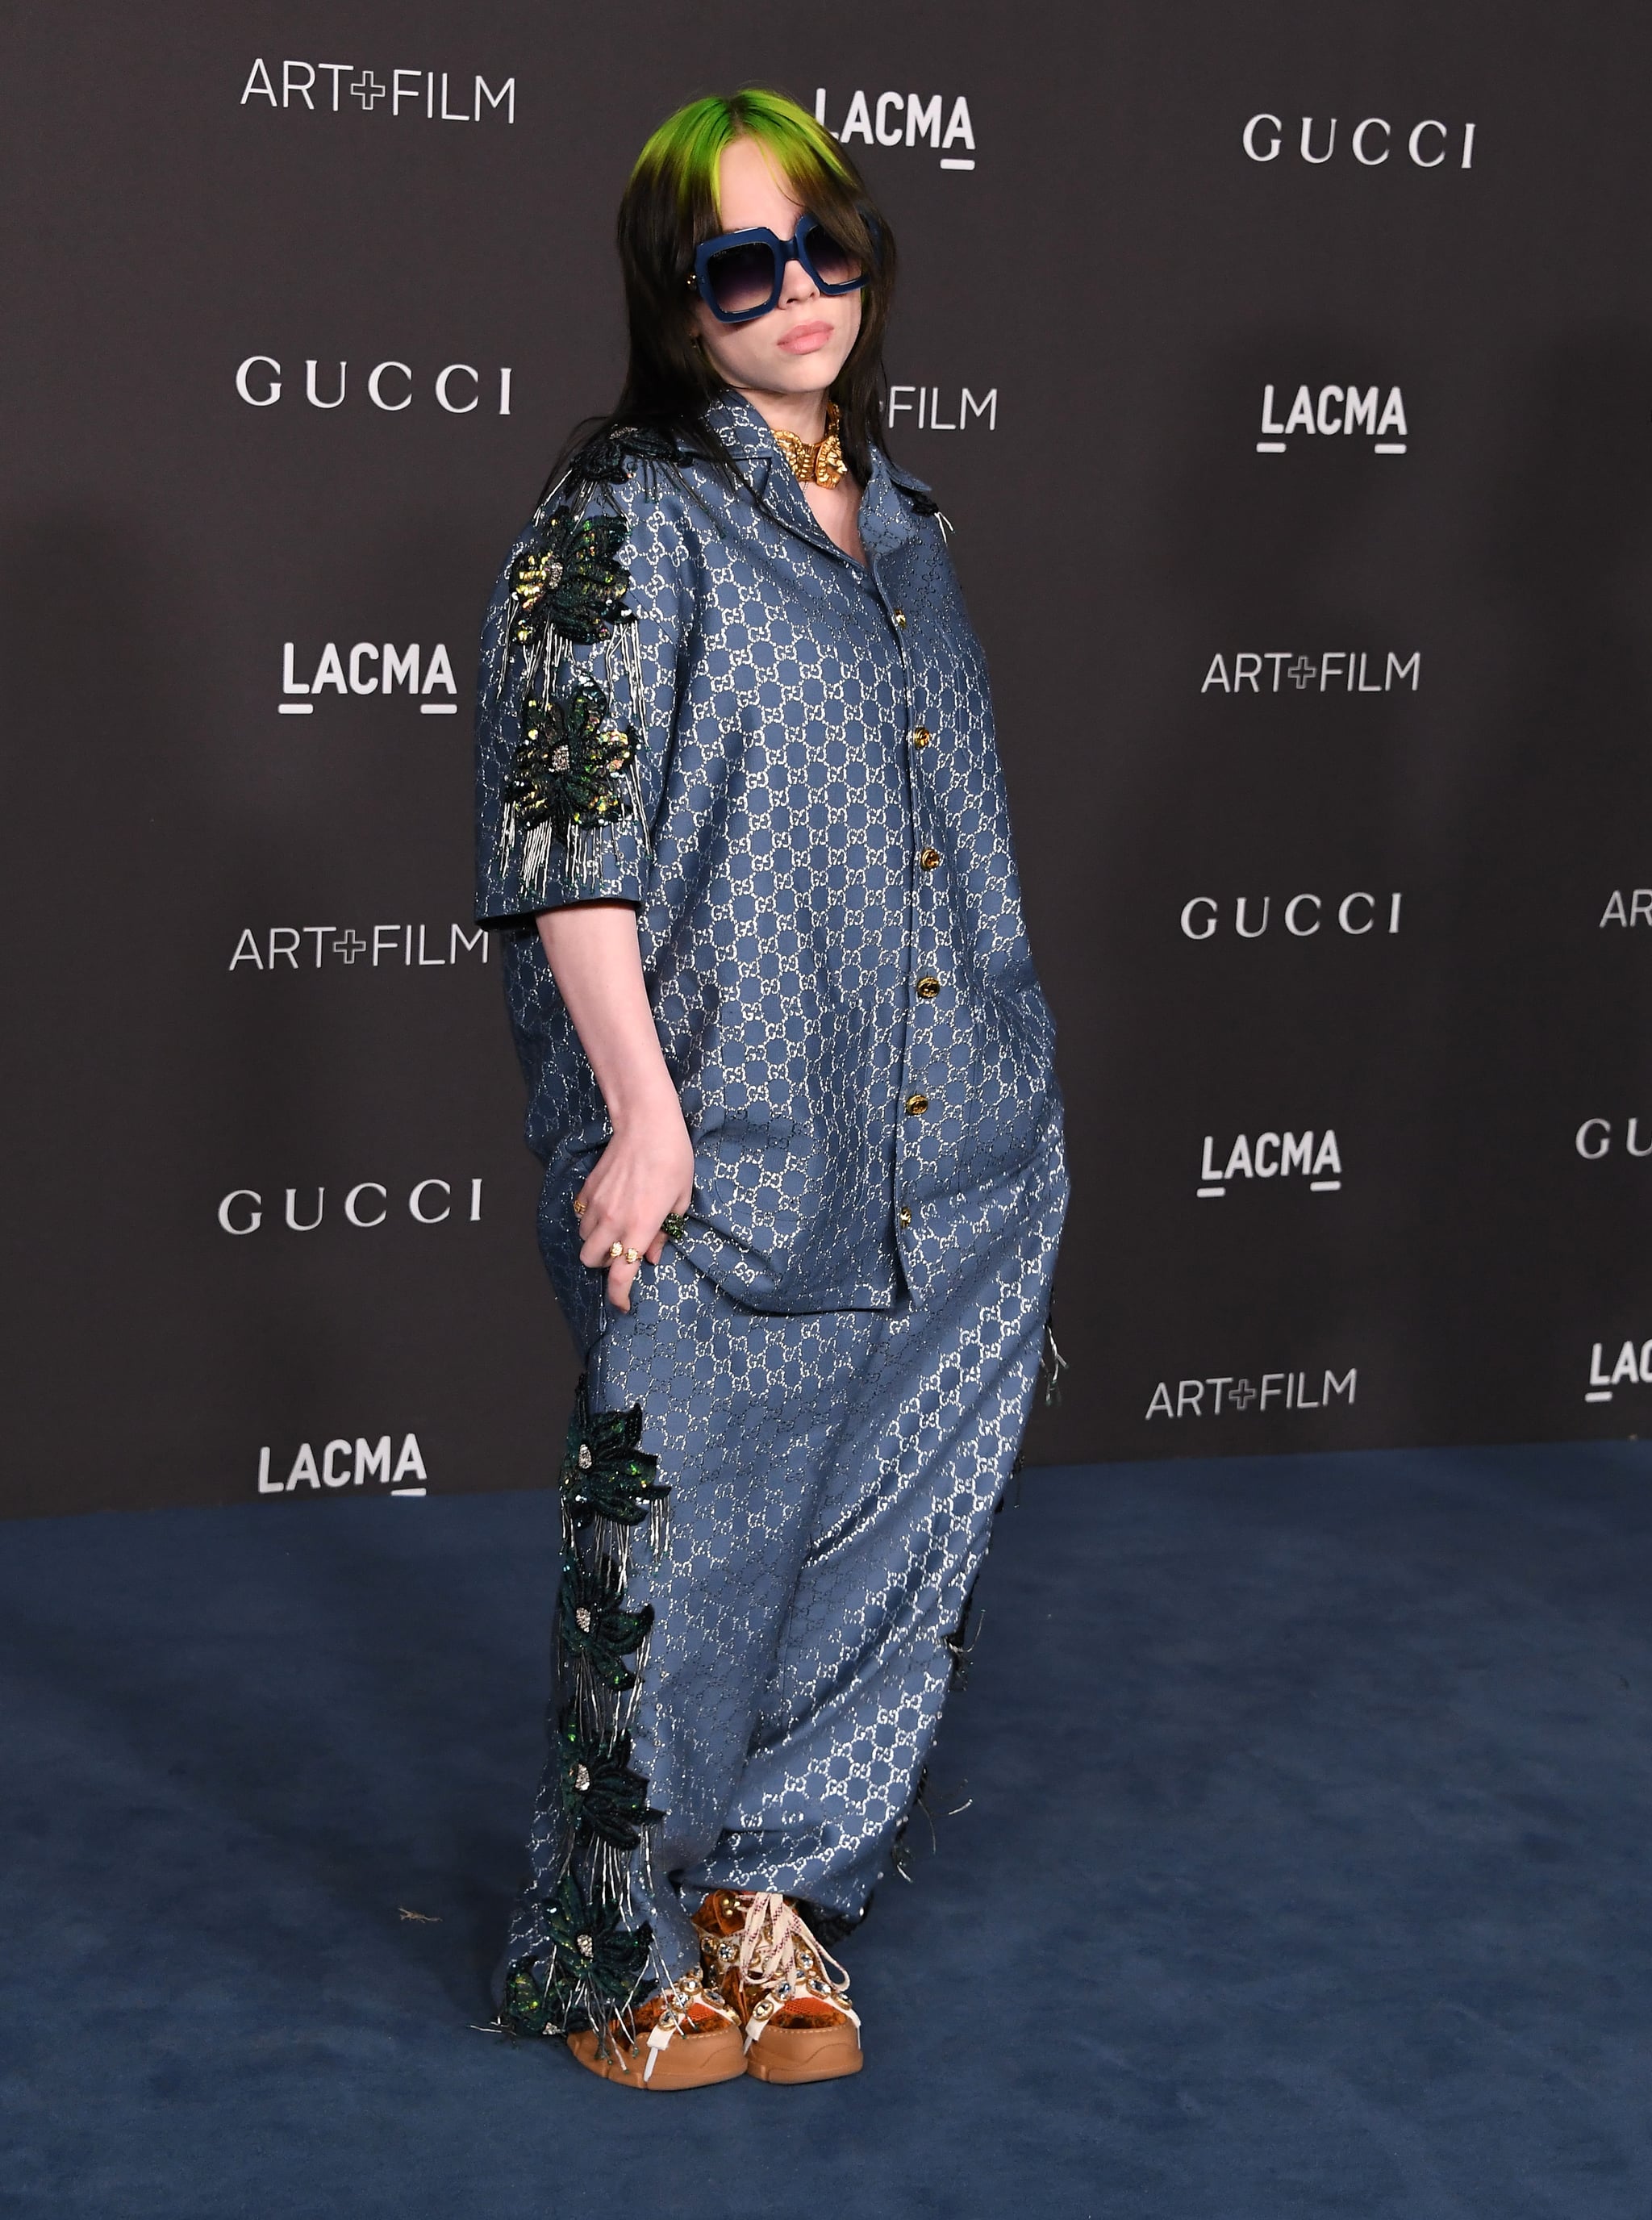 Fashion, Shopping & Style | Billie Eilish Wore Head-to-Toe Gucci and Looked  Like a Total Badass | POPSUGAR Fashion Photo 19